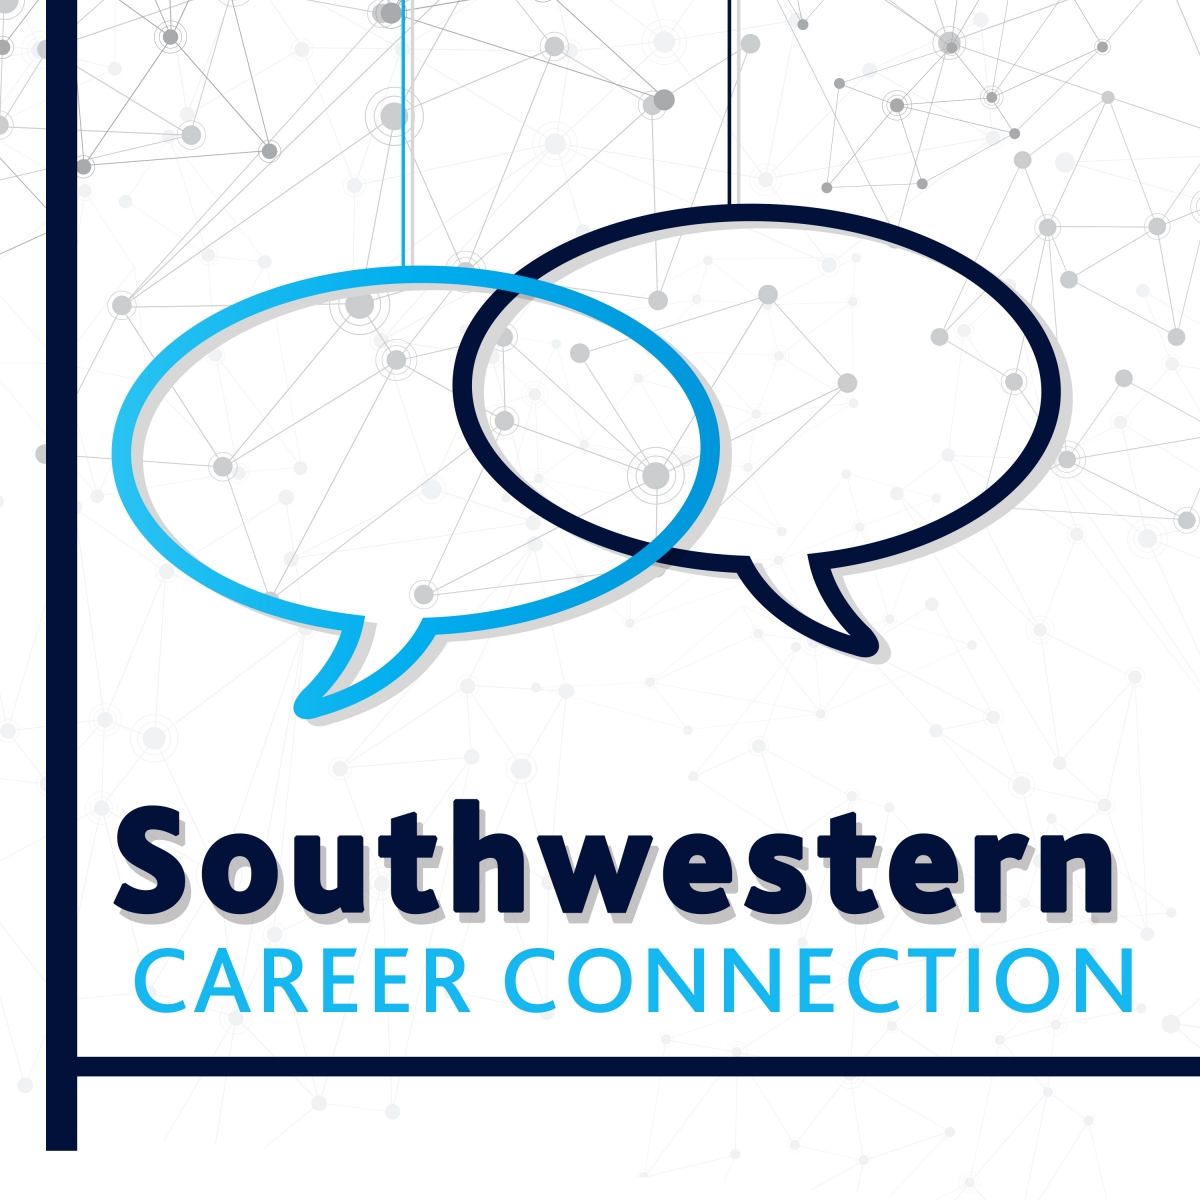 Logo reads Southwestern Career Connection